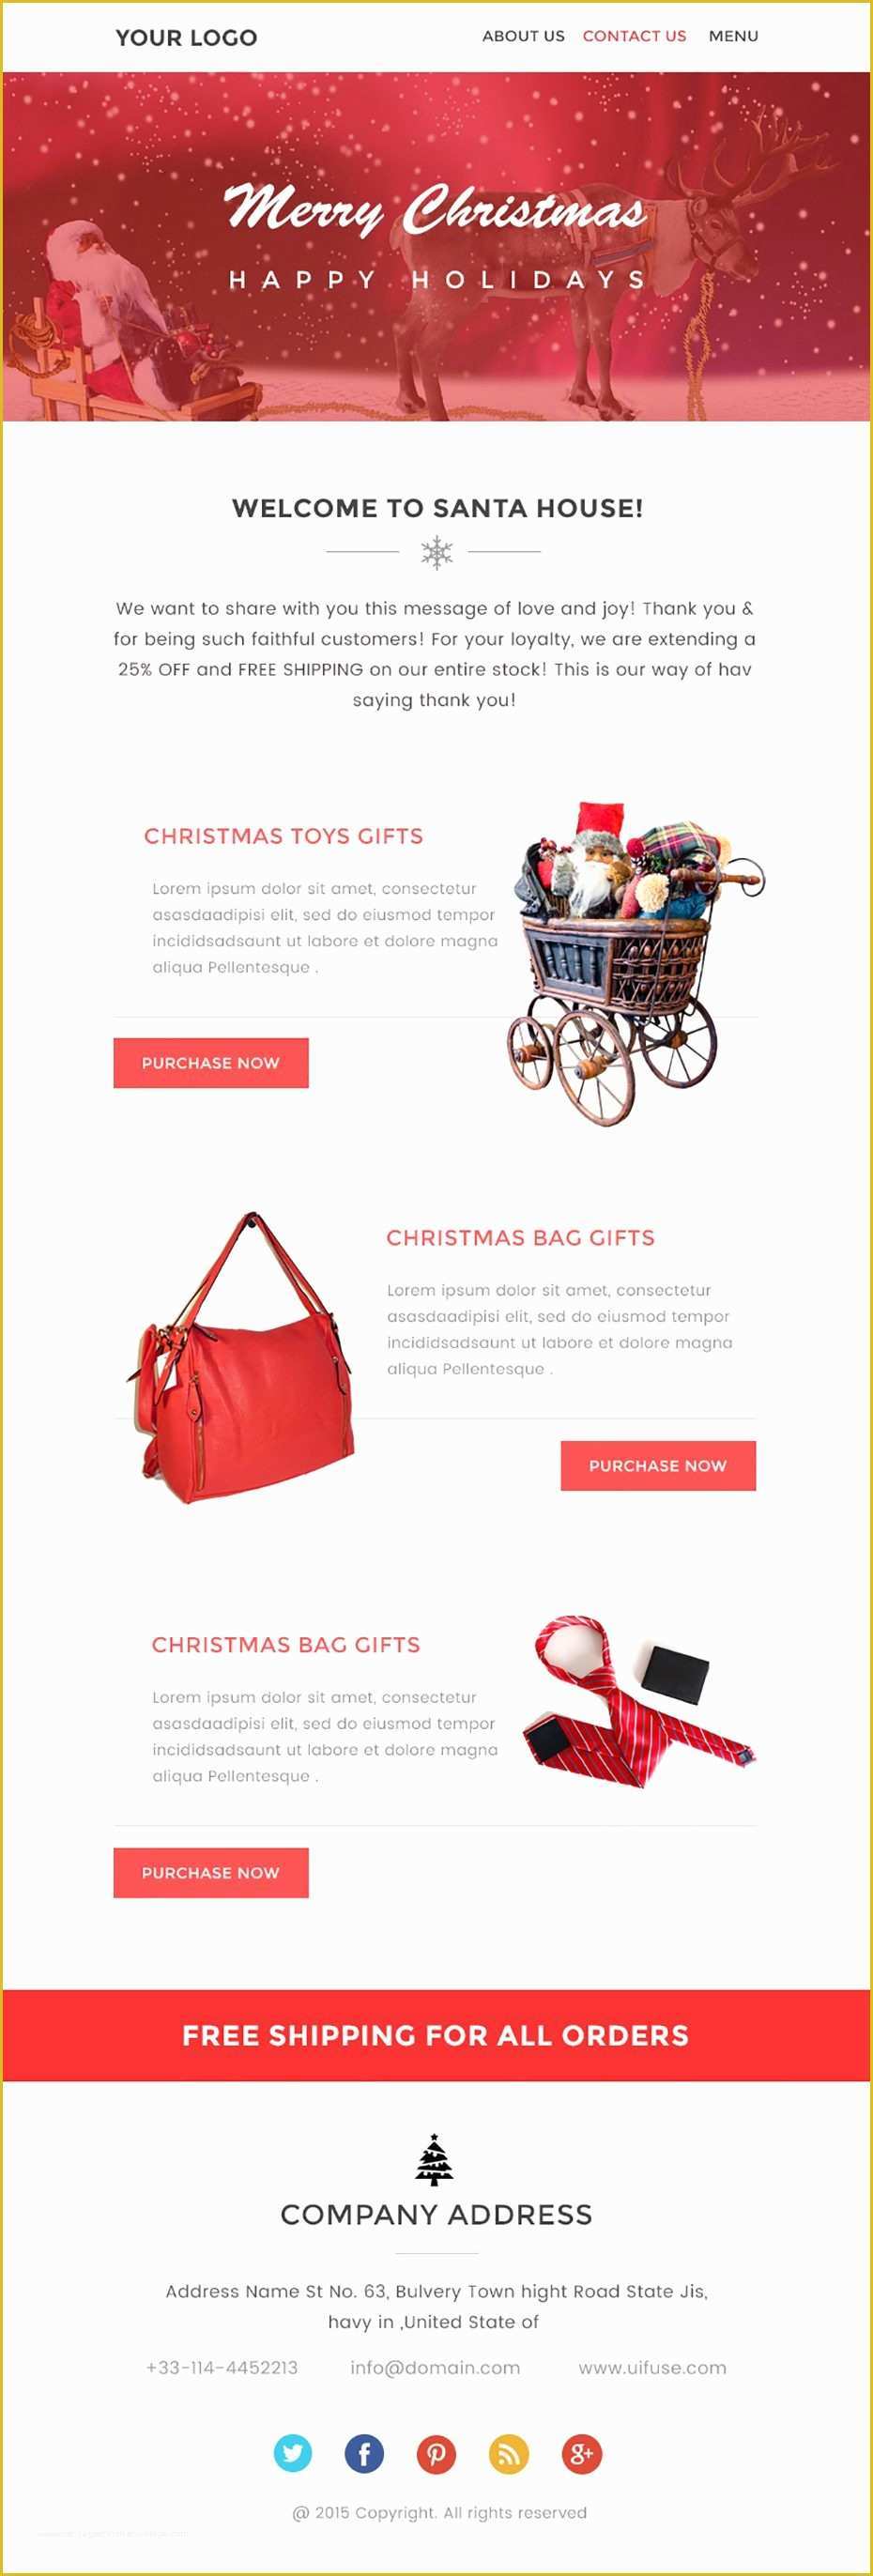 Email Newsletter Templates Free Download Of Christmas Newsletter Template – Free Psd Download Uifuse